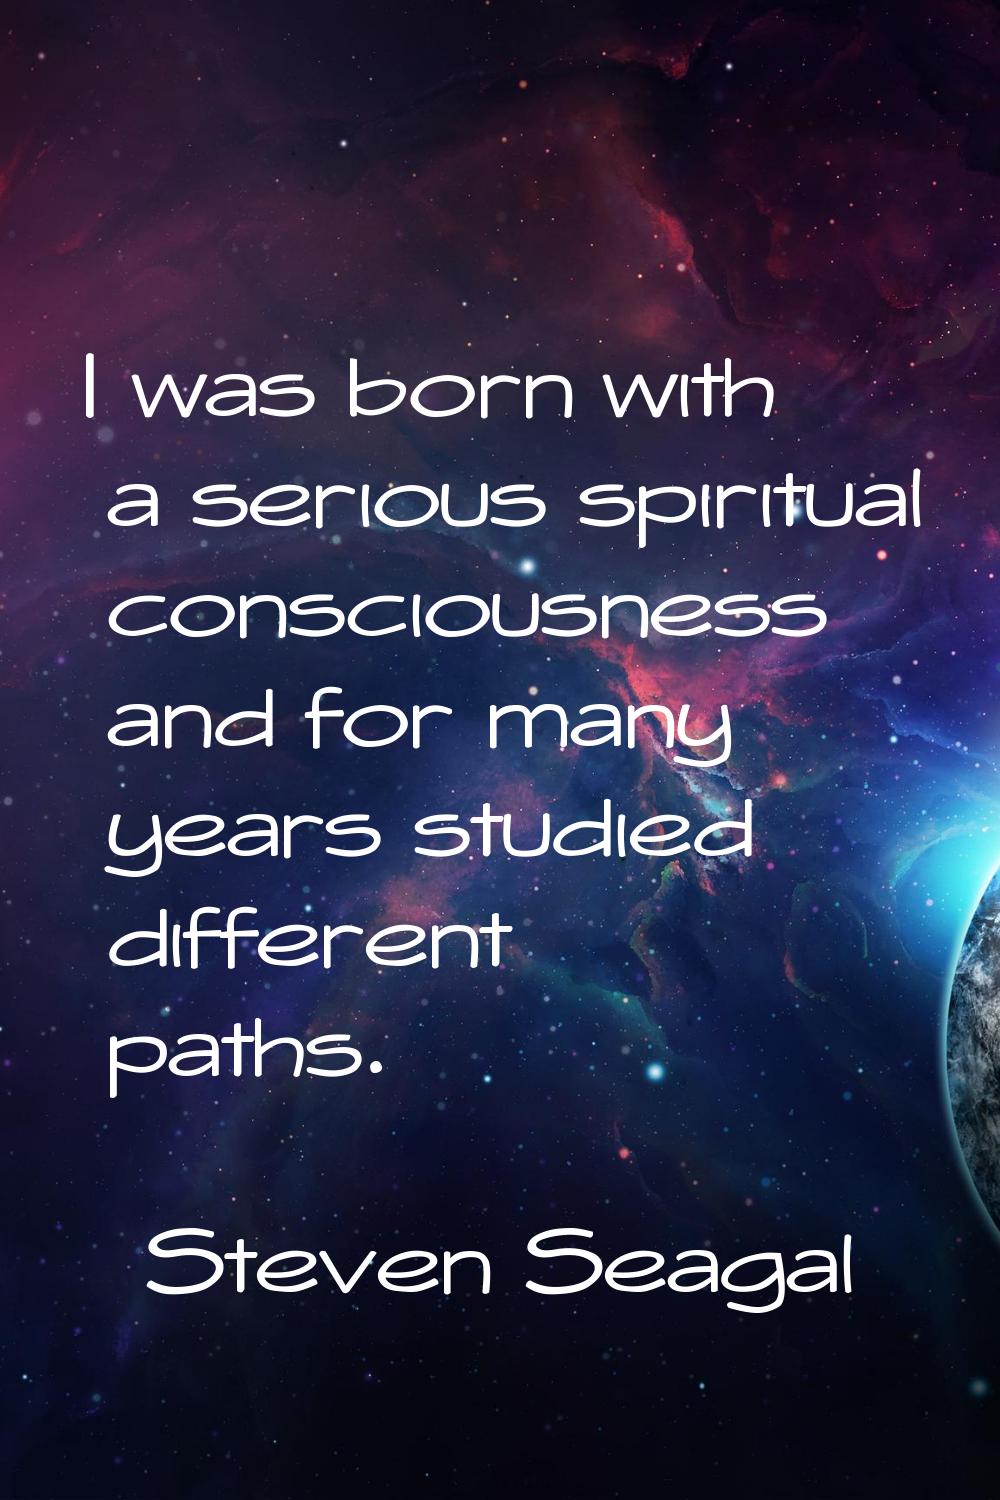 I was born with a serious spiritual consciousness and for many years studied different paths.